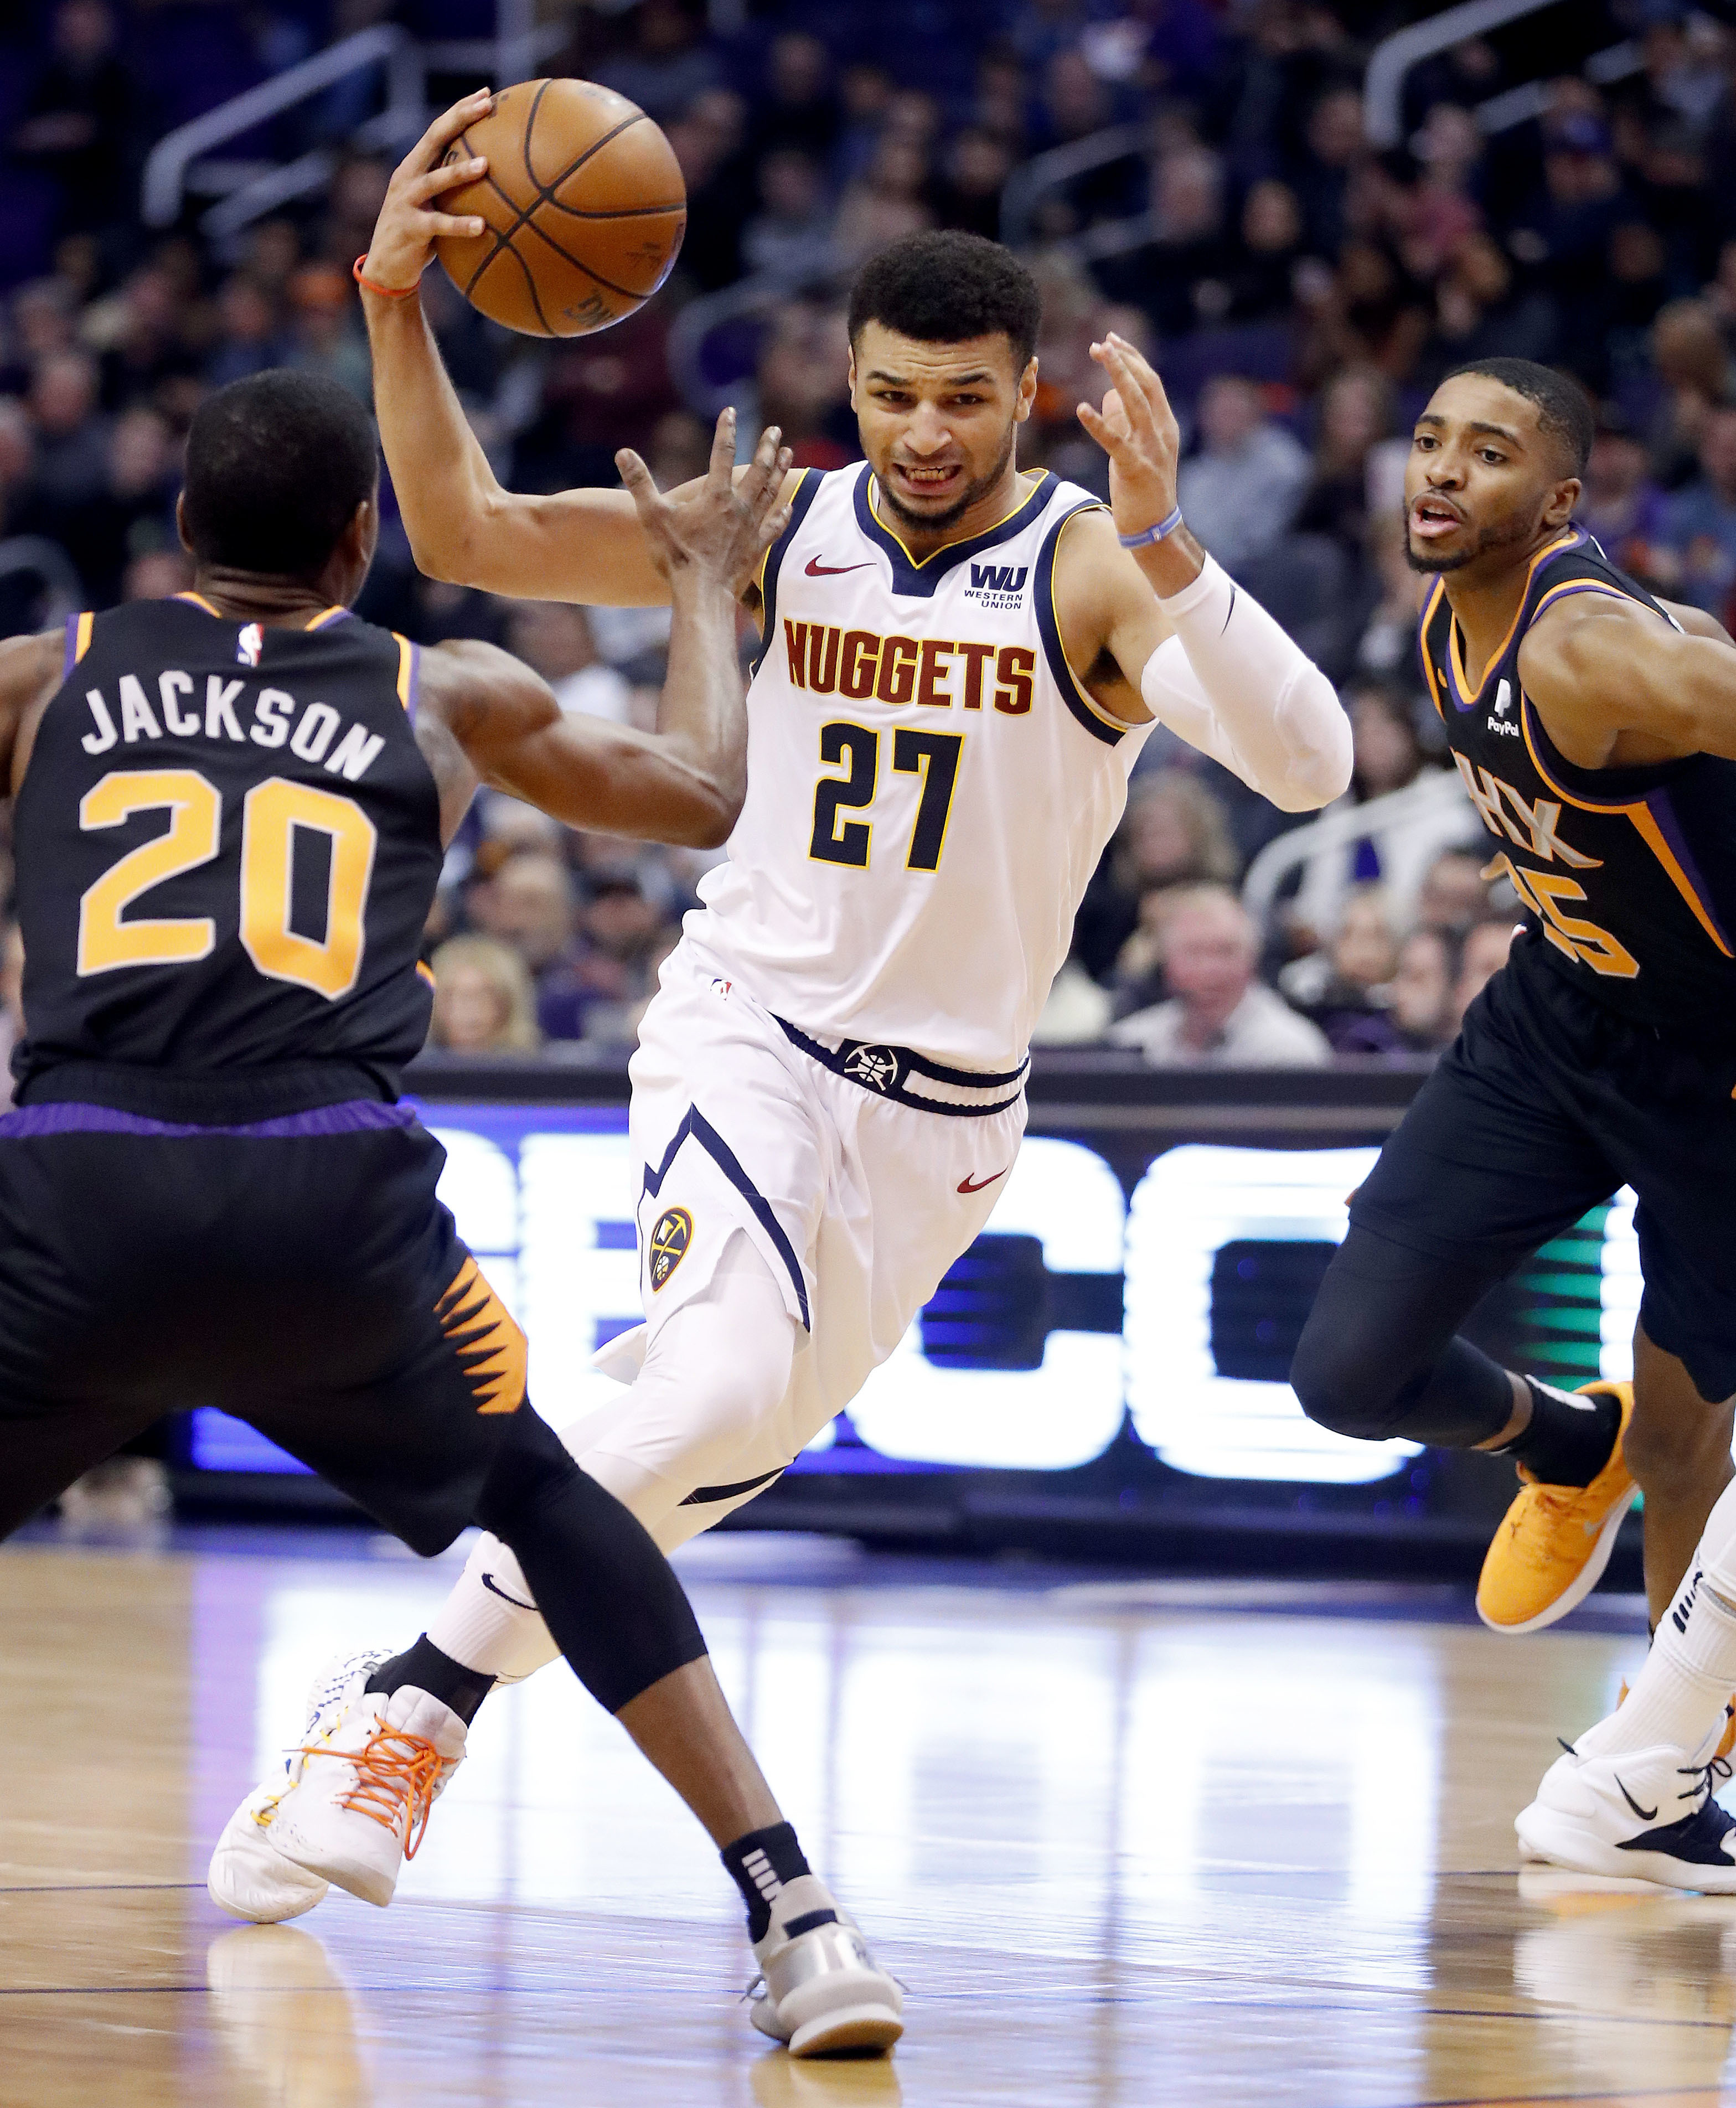 Murray scores 46, hits 9 3s as Nuggets hold off Suns 122-118